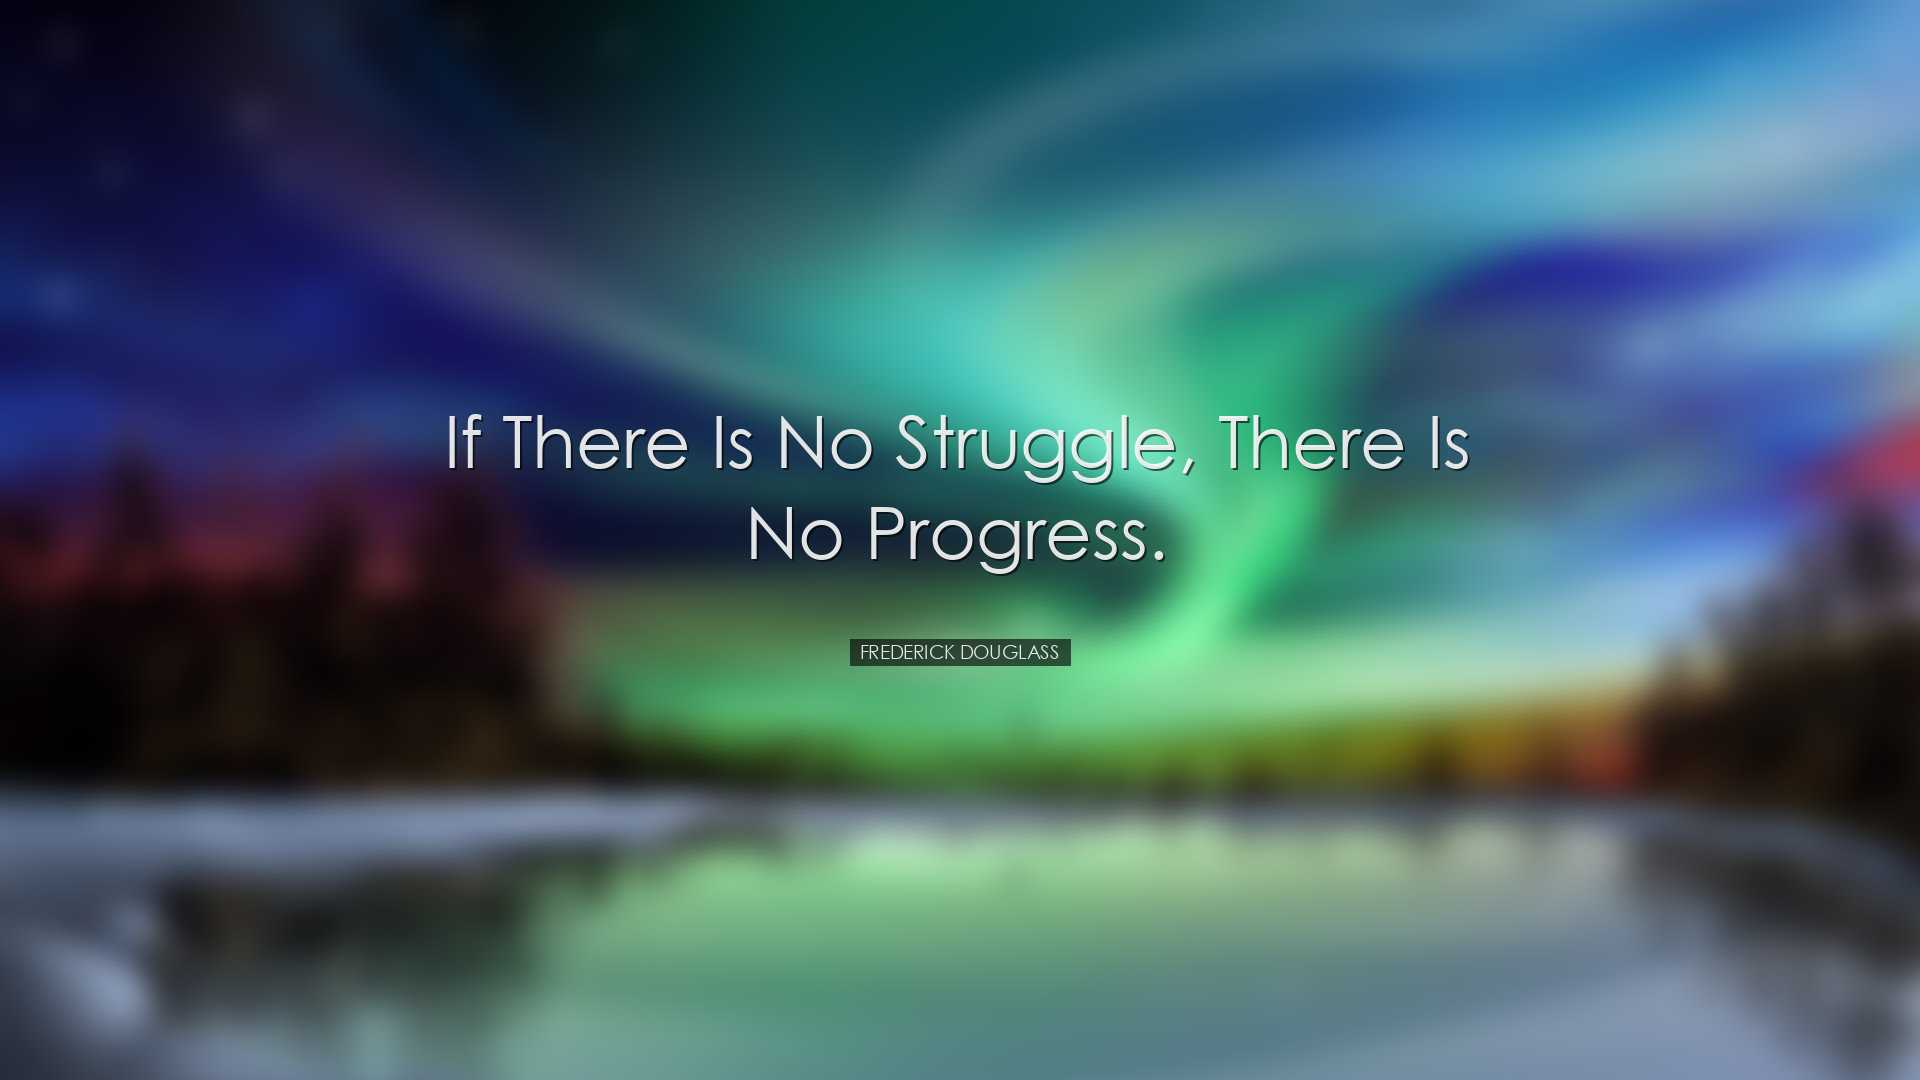 If there is no struggle, there is no progress. - Frederick Douglas